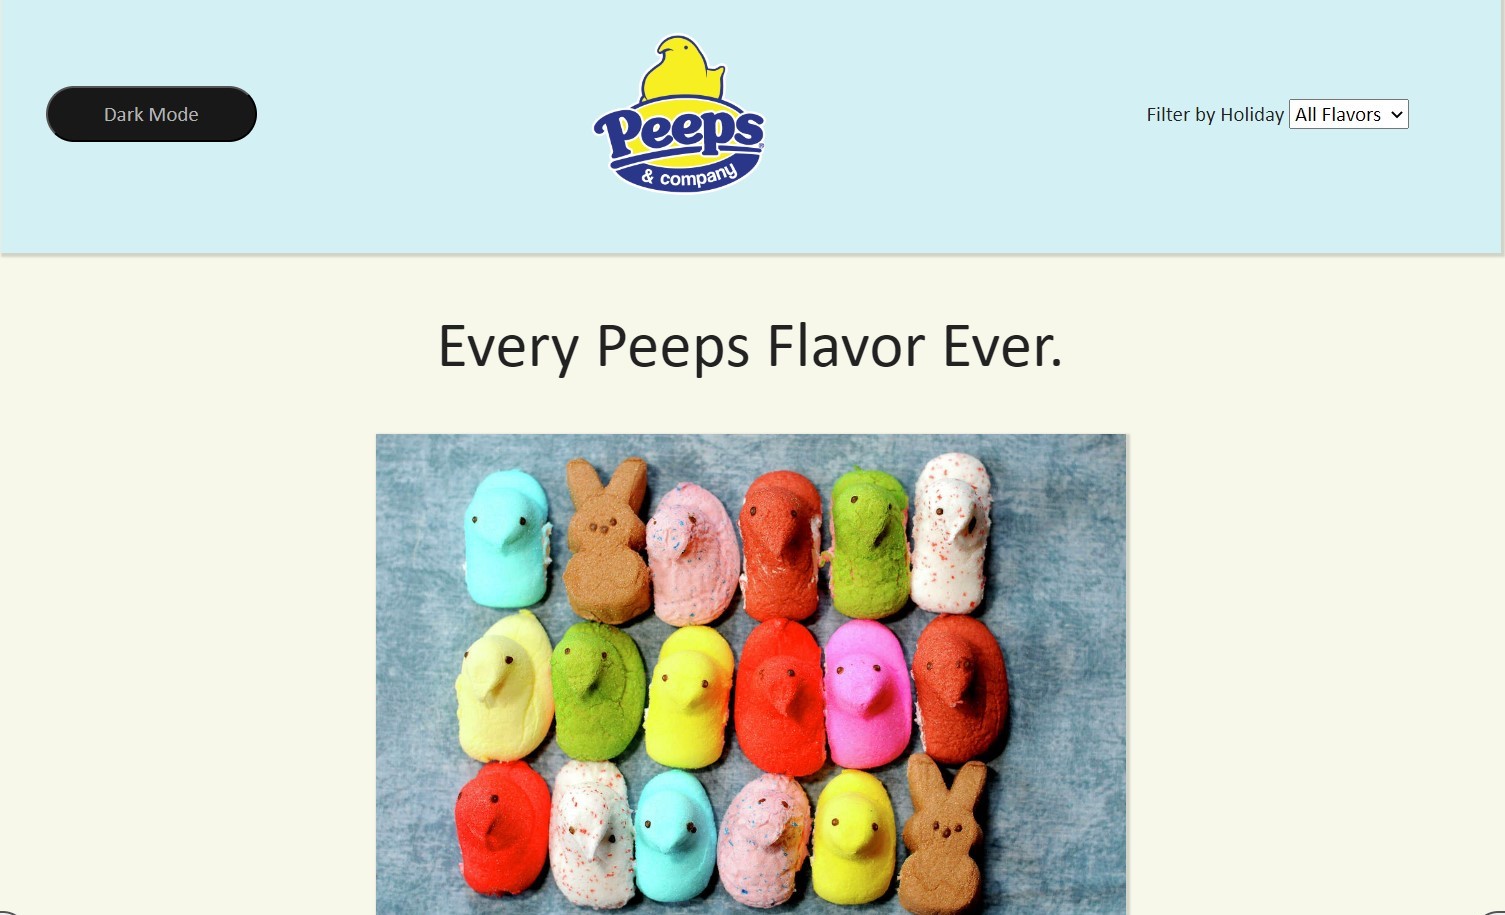 Every Peeps Flavor project